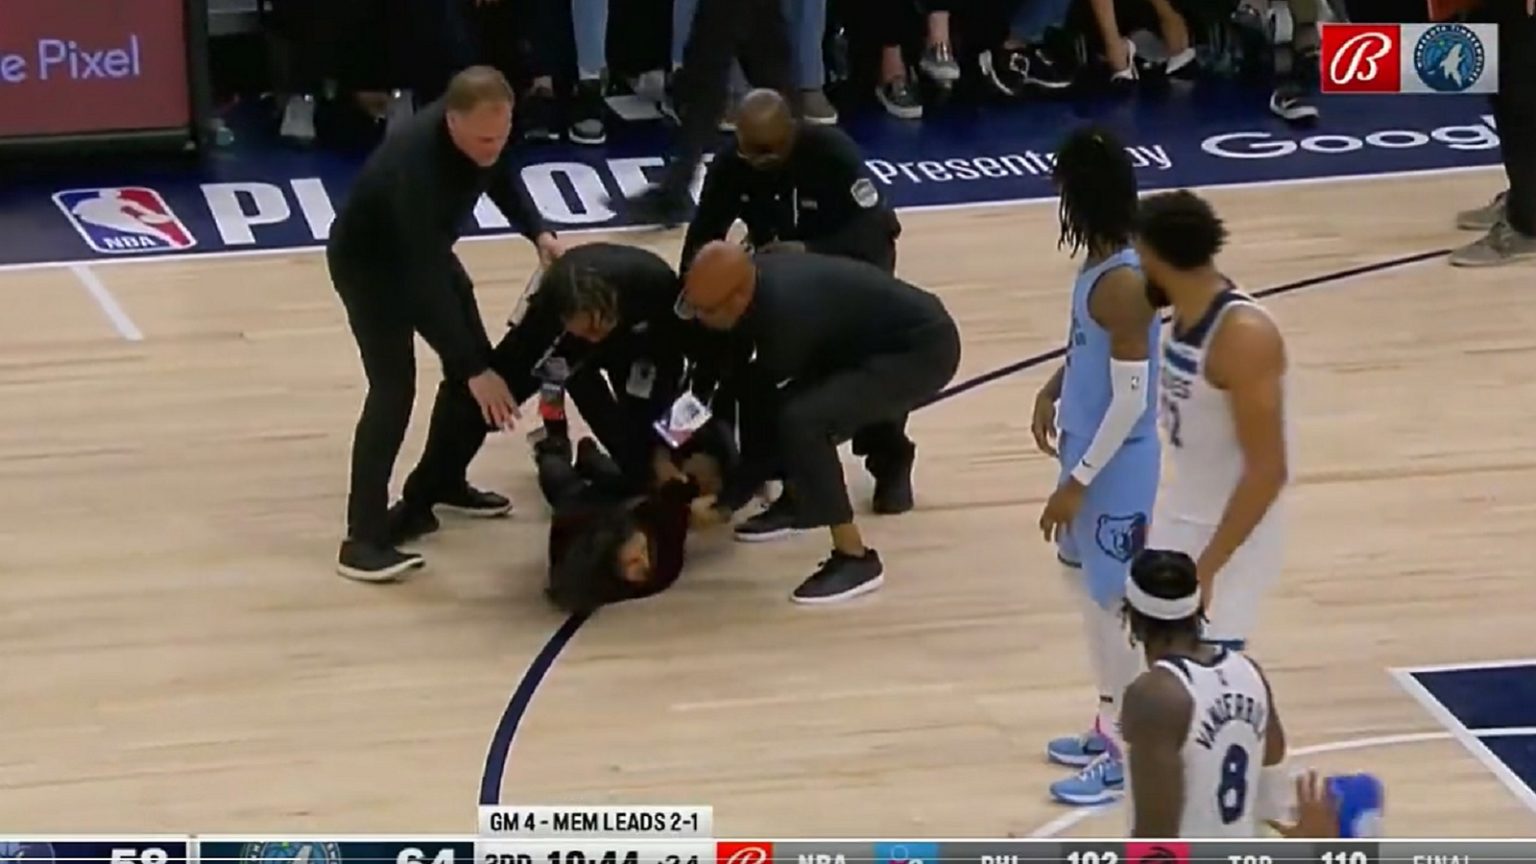 Security guard makes huge tackle on woman trying to protest at Timberwolves game